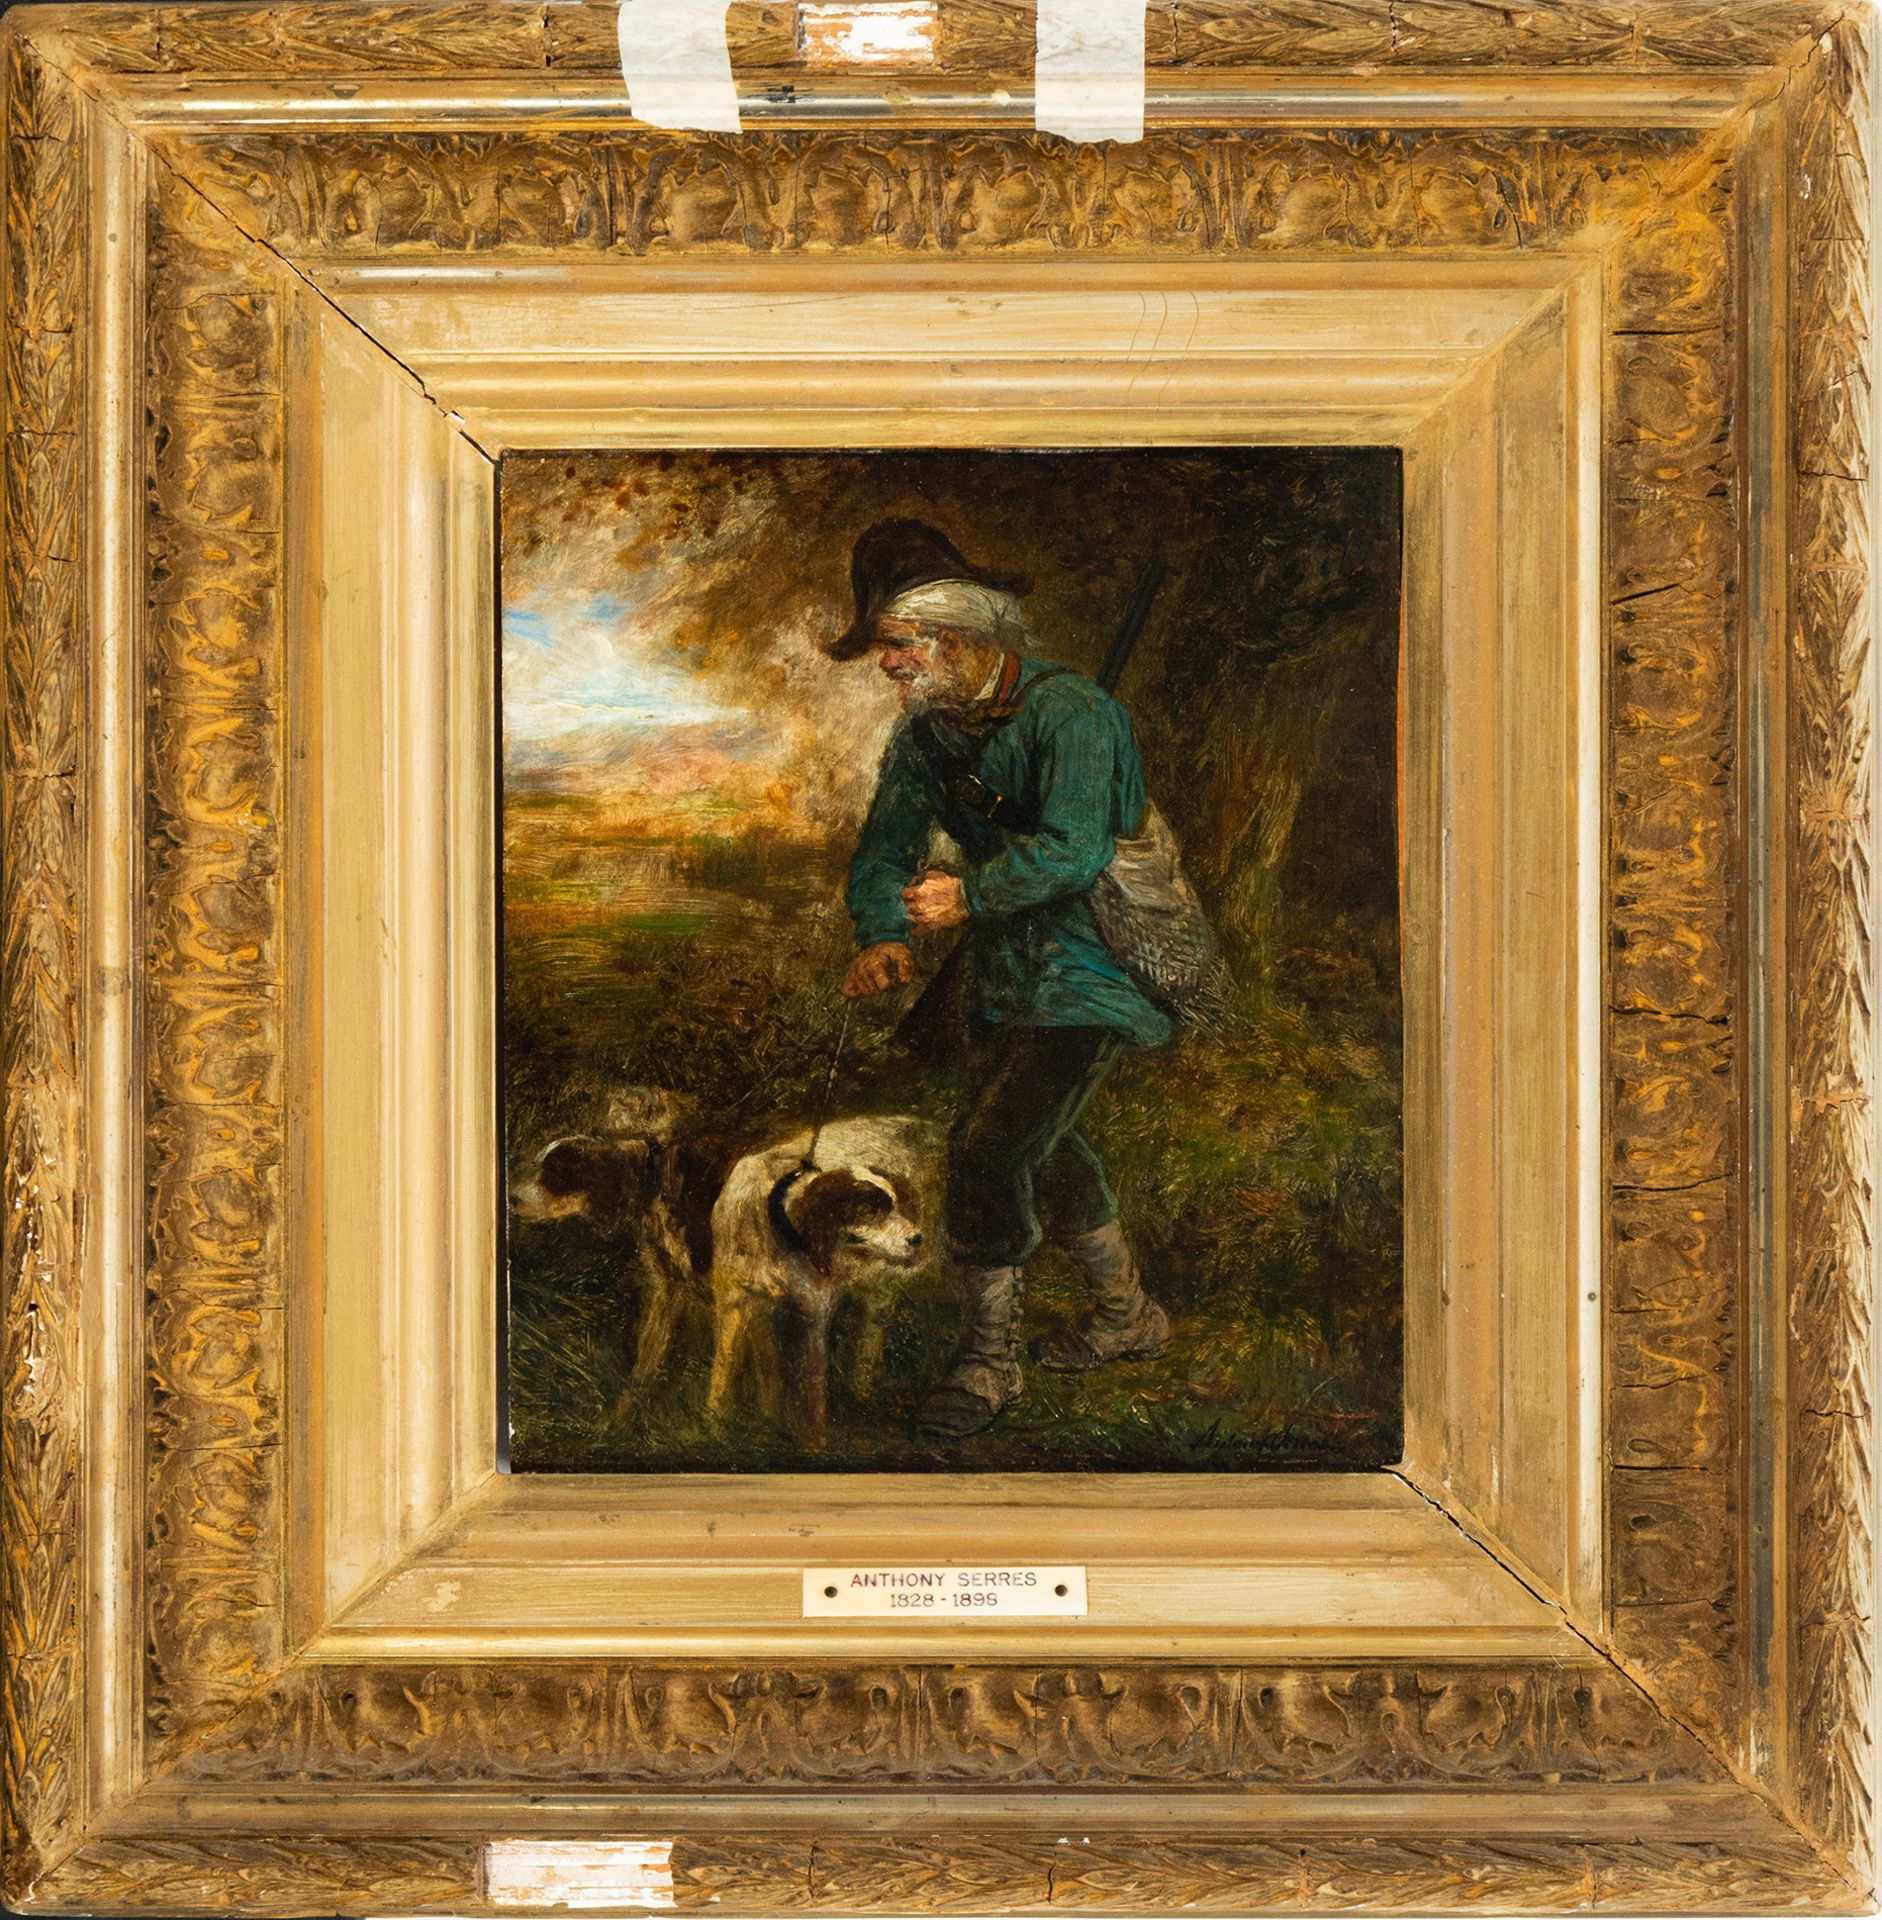 Hunter with his Dog, attributed to Anthony Serres, 19th century European School